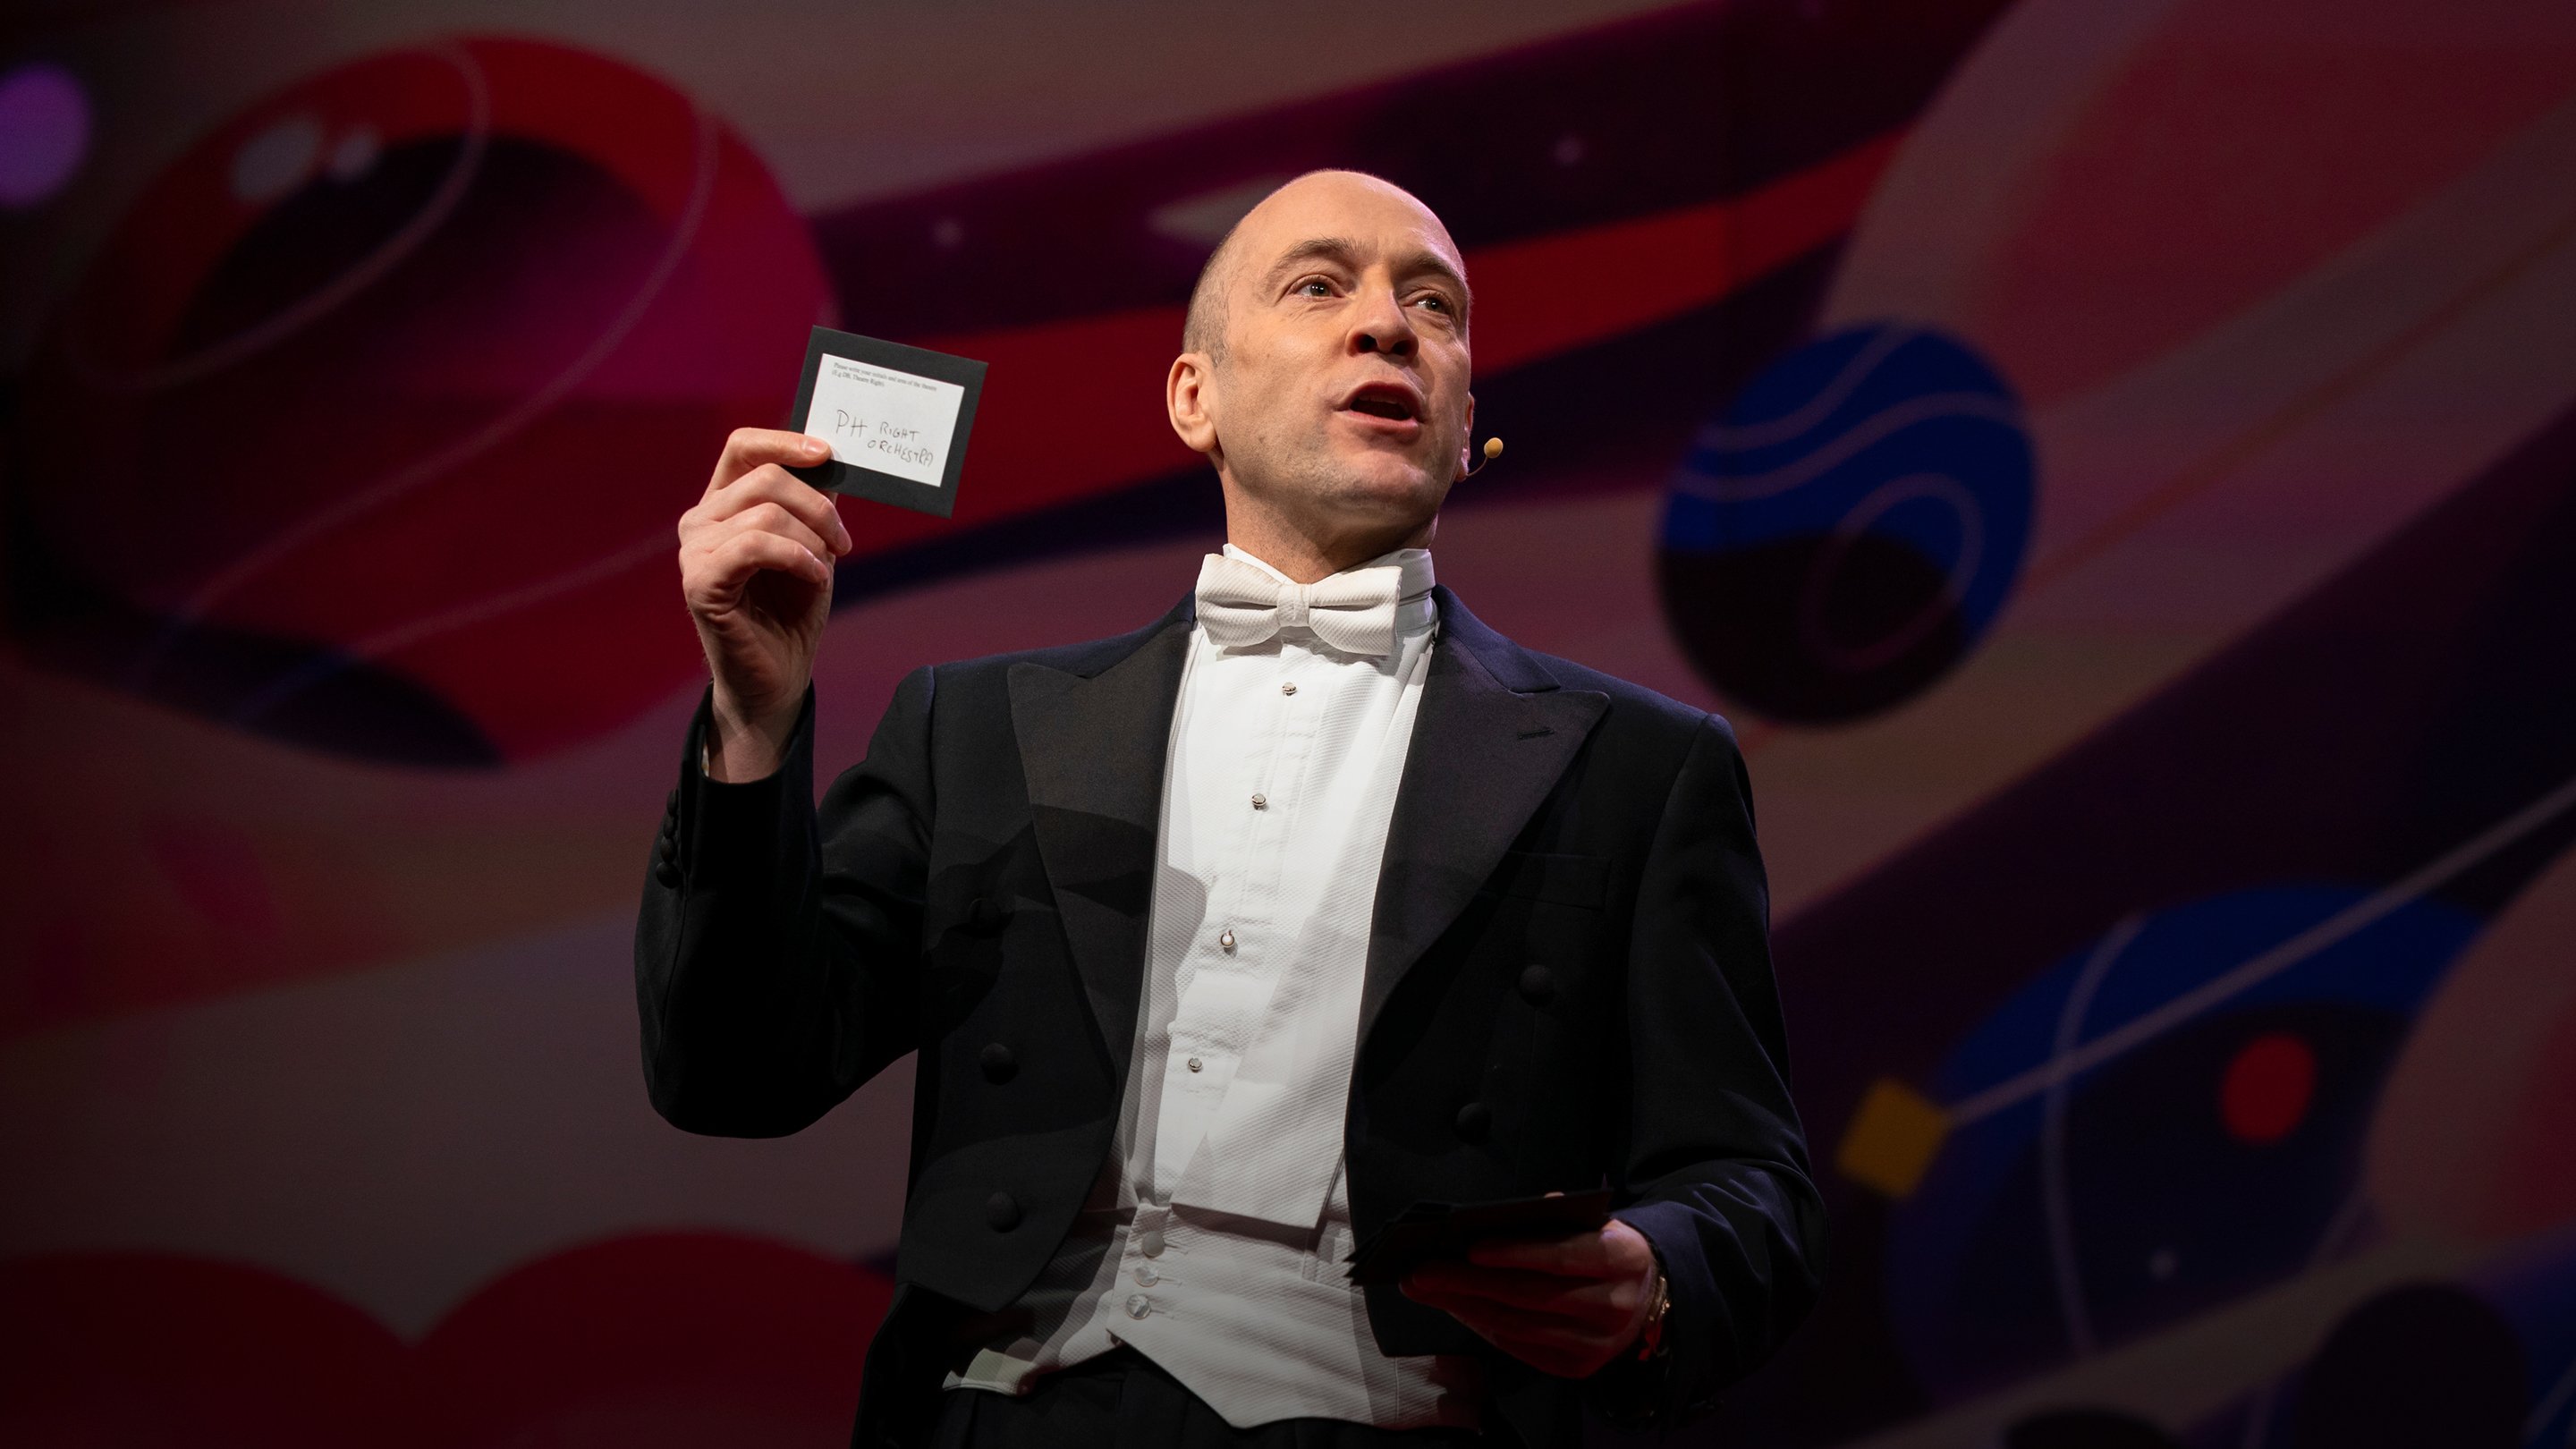 Derren Brown: Mentalism, mind reading and the art of getting inside